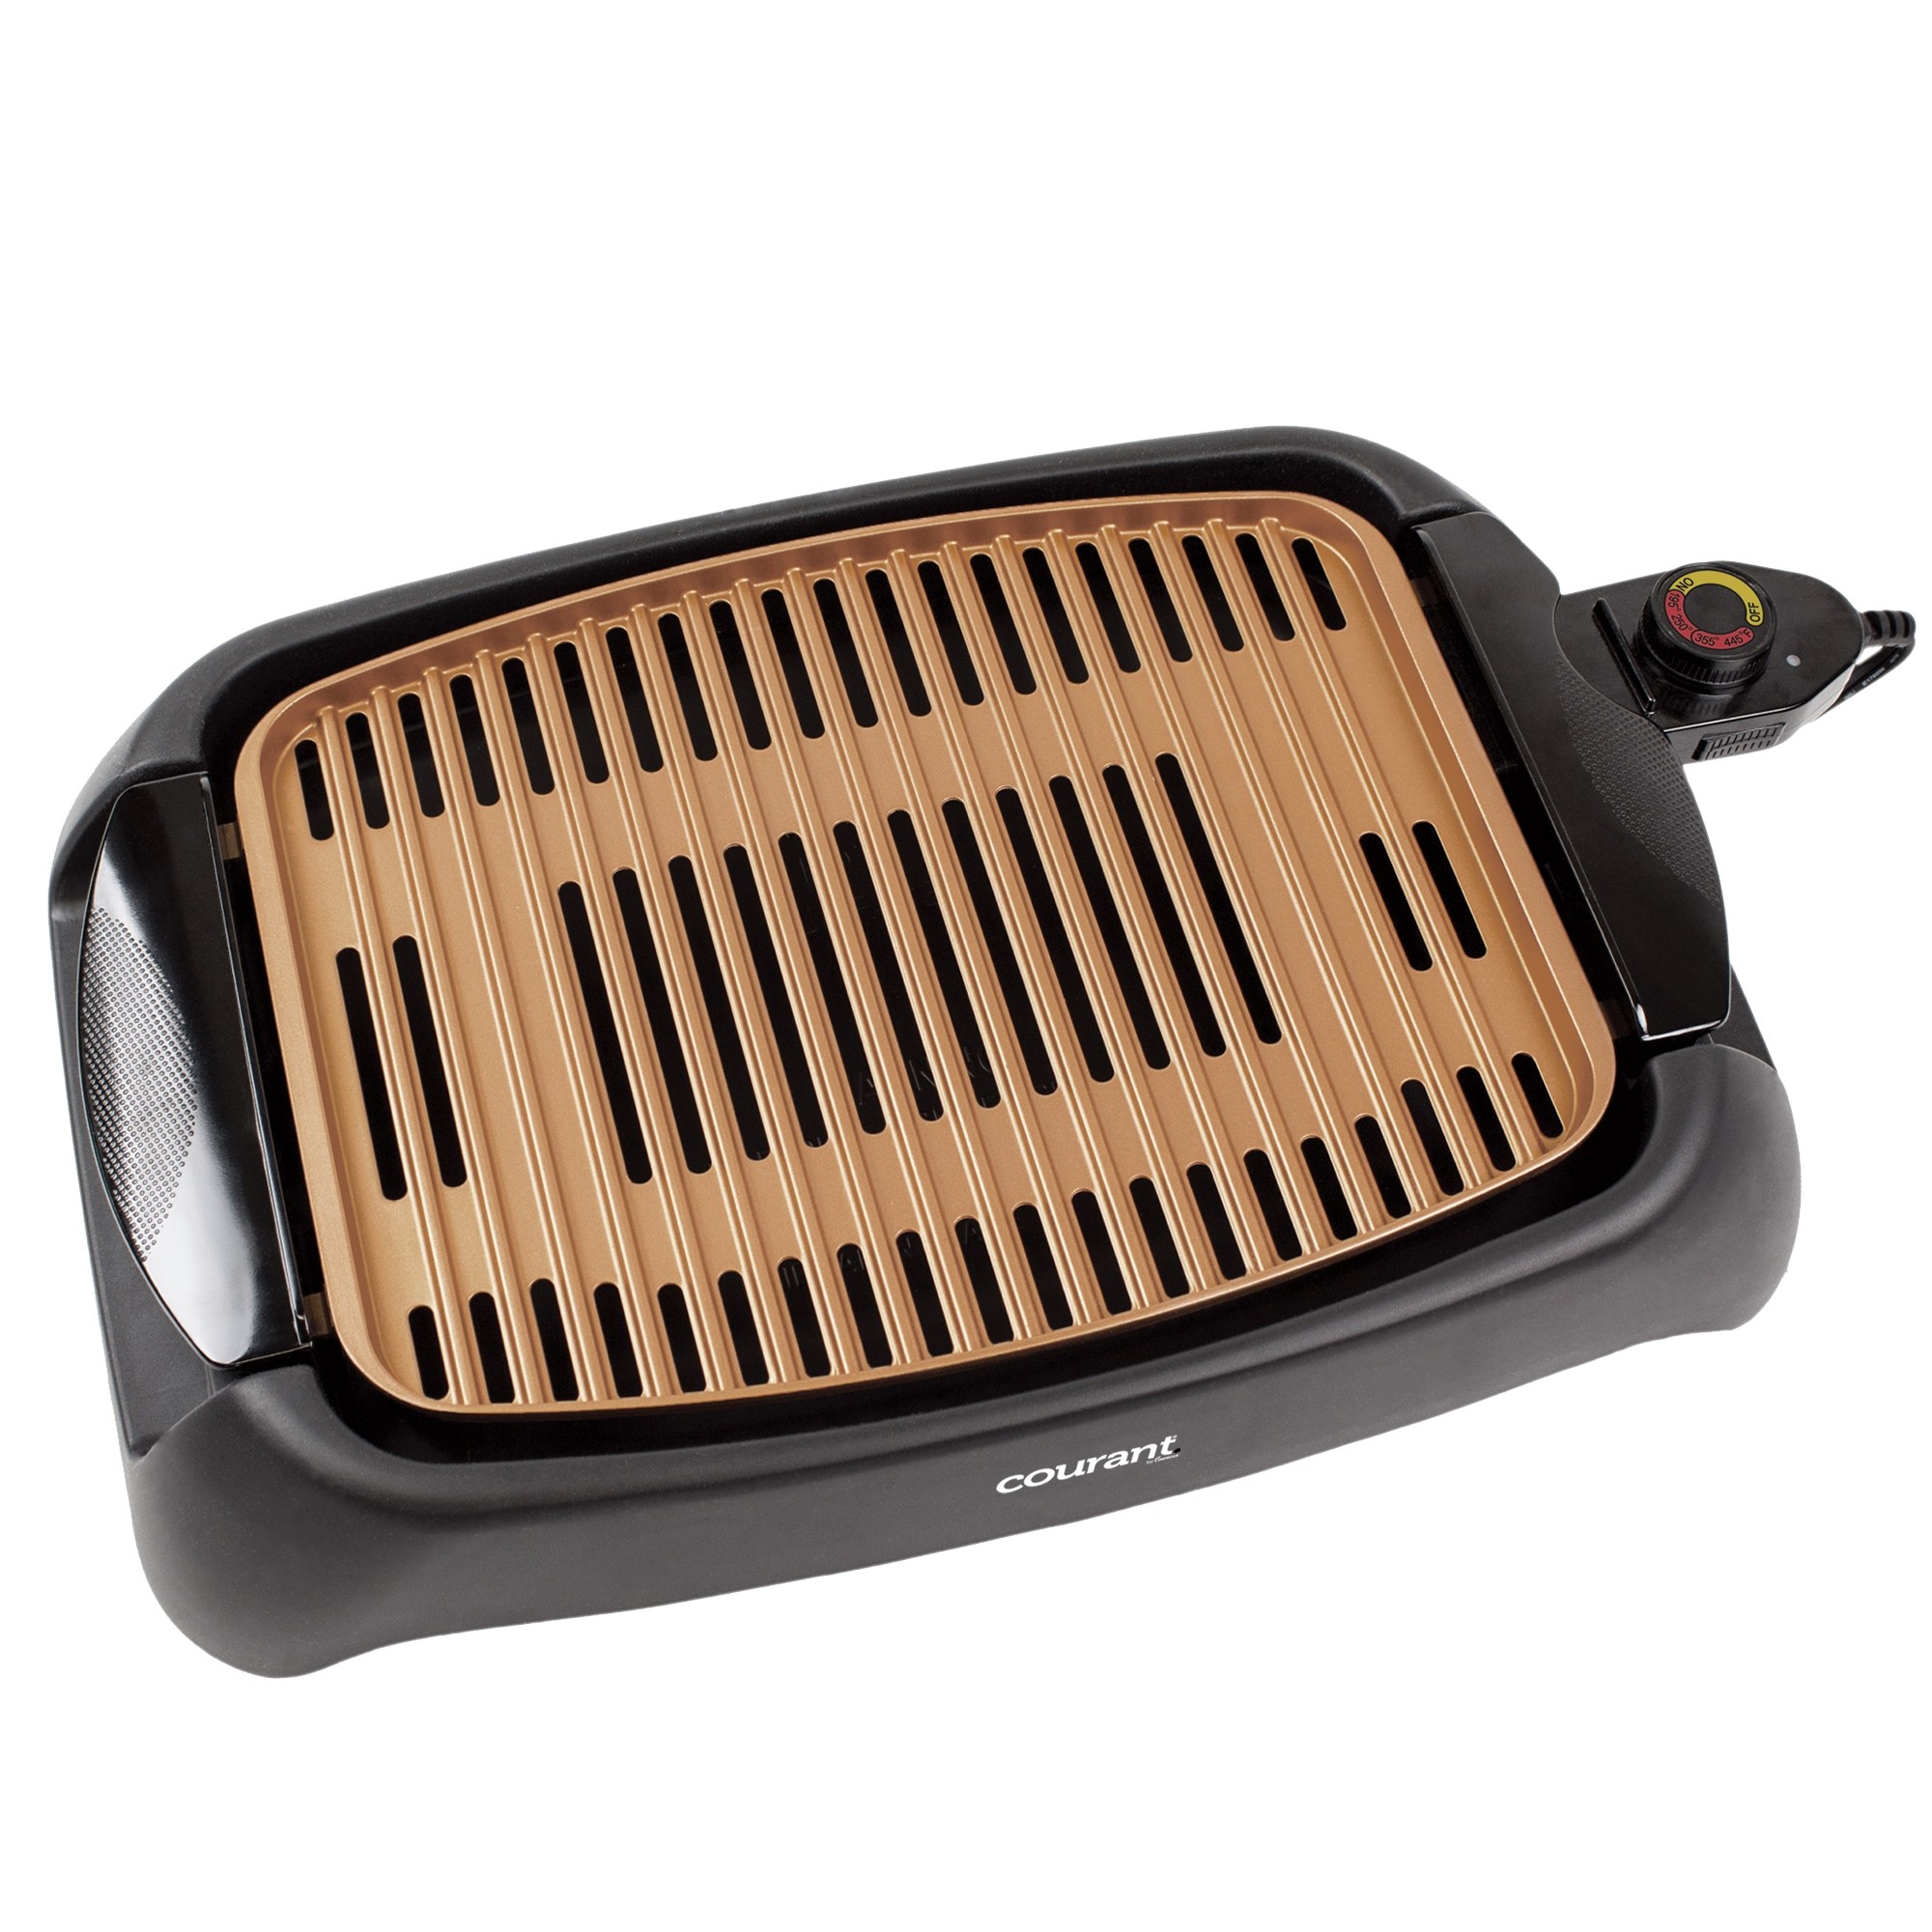 Rød dato Cater Muldyr Indoor Smokeless Grill with Copper Coat